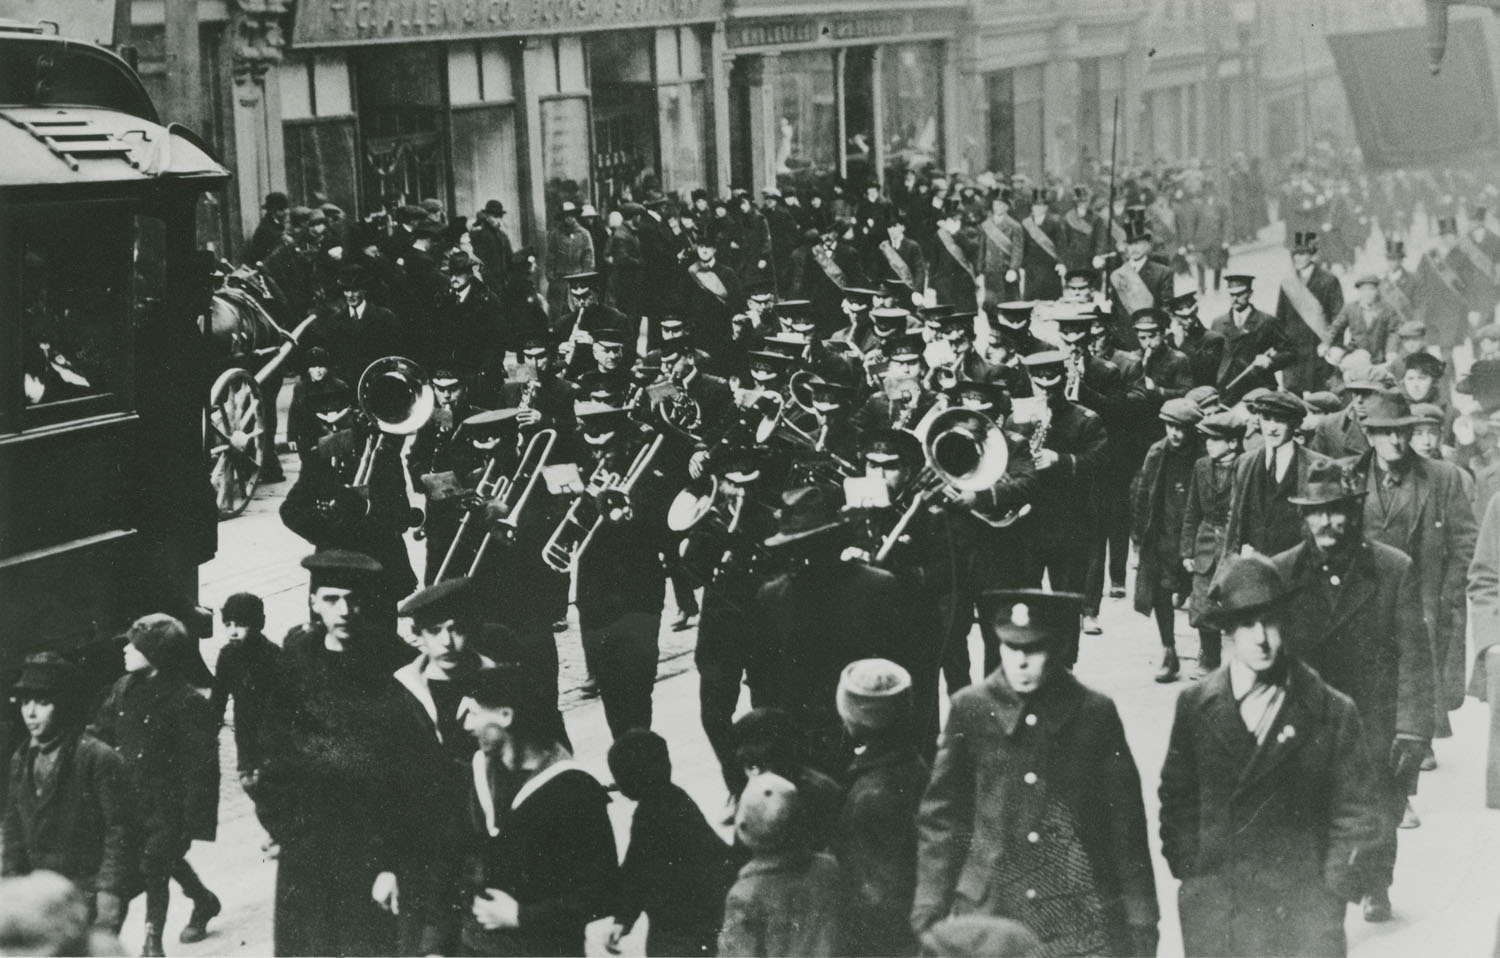 charitable-irish-society : Band in Parade passing T.C. Allen & Co., books, Granville Street, Halifax